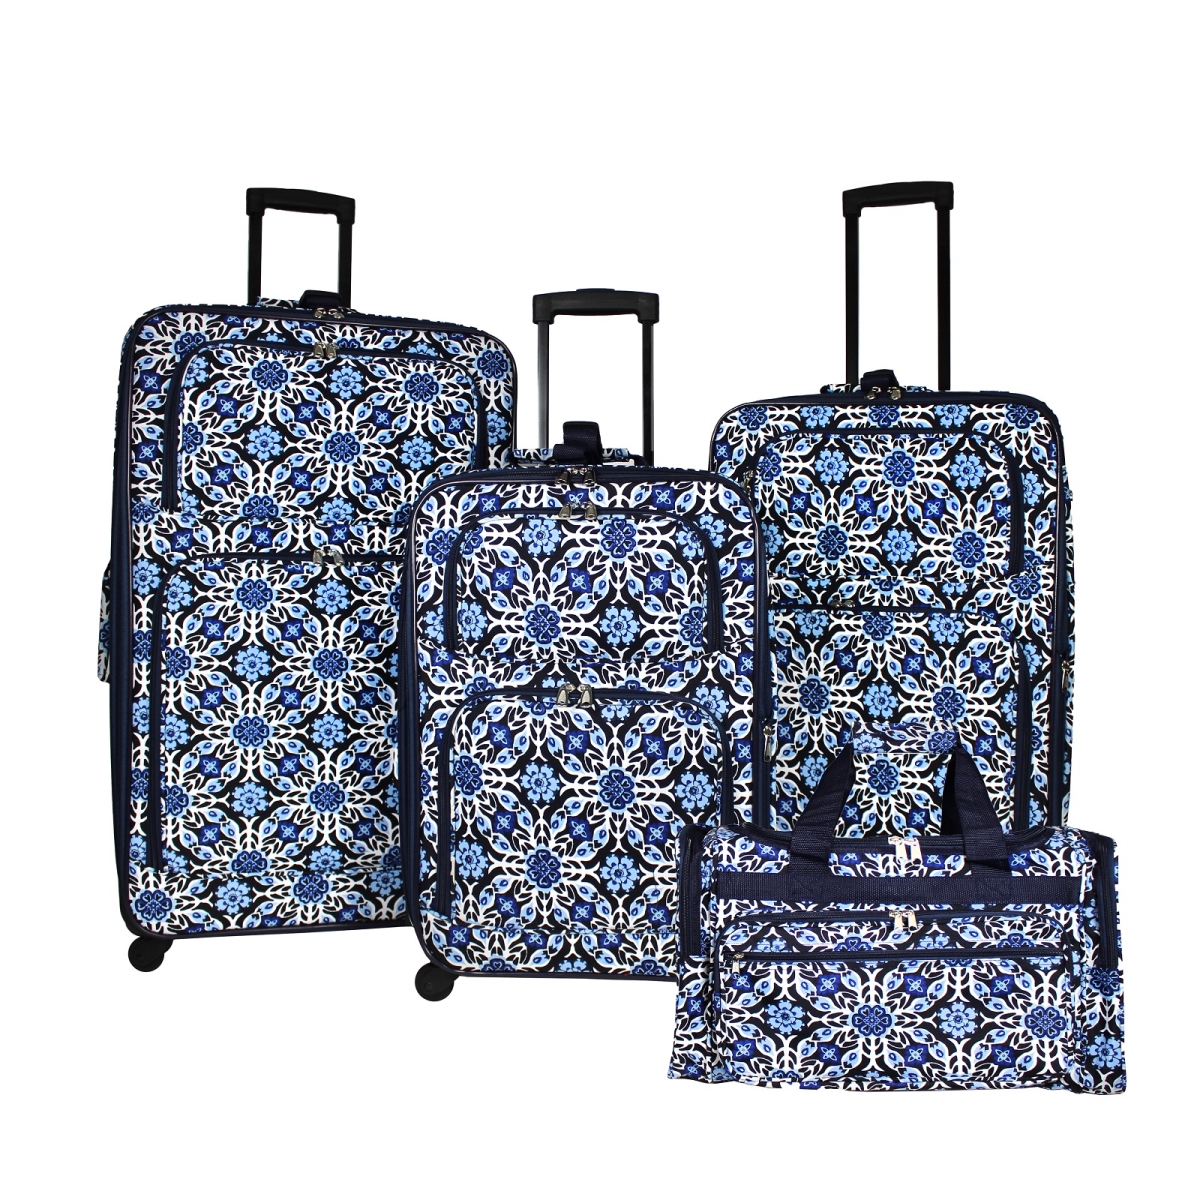 818703-t19-213 Expandable Spinner Luggage Set, Winter Flower - 4 Piece